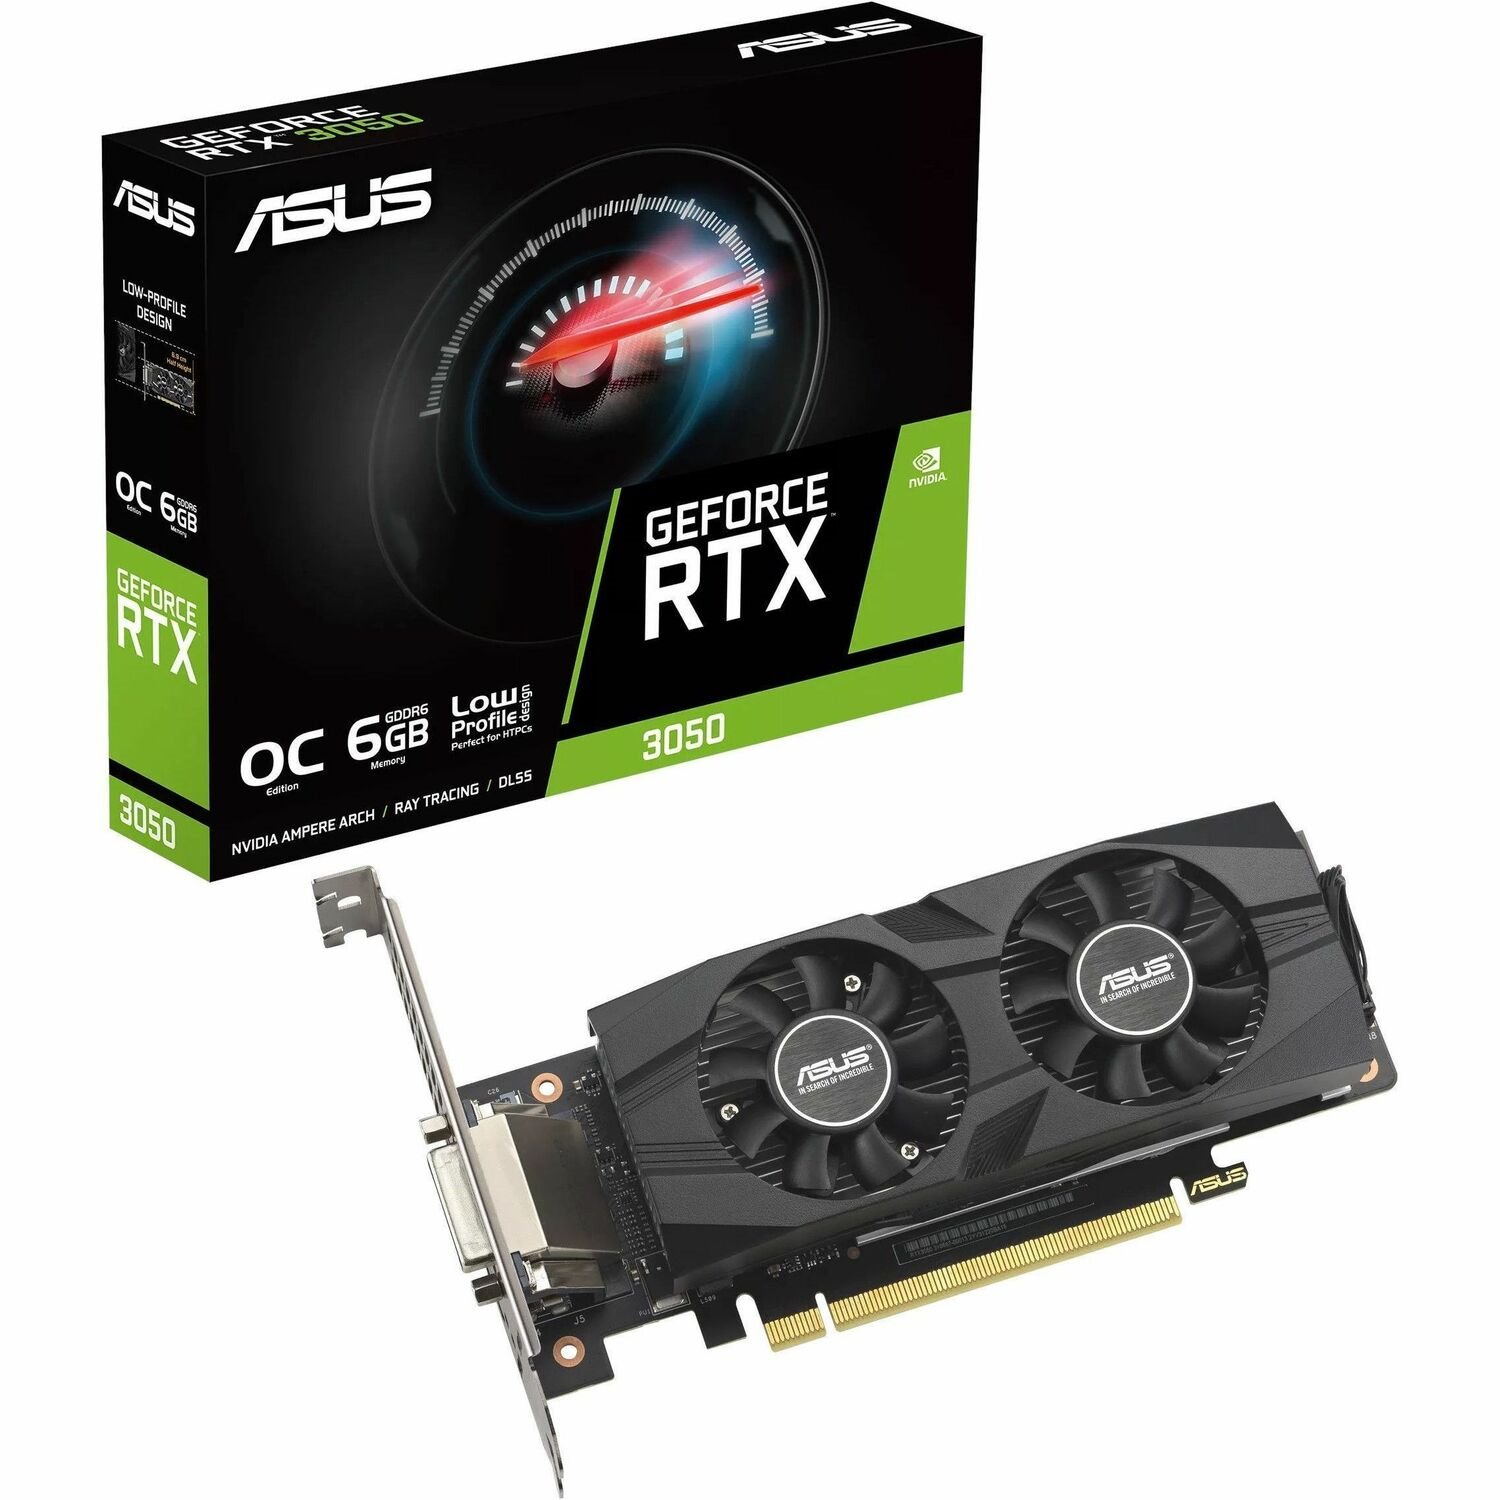 Asus NVIDIA GeForce RTX 3050 Graphic Card - 6 GB GDDR6 - Low-profile